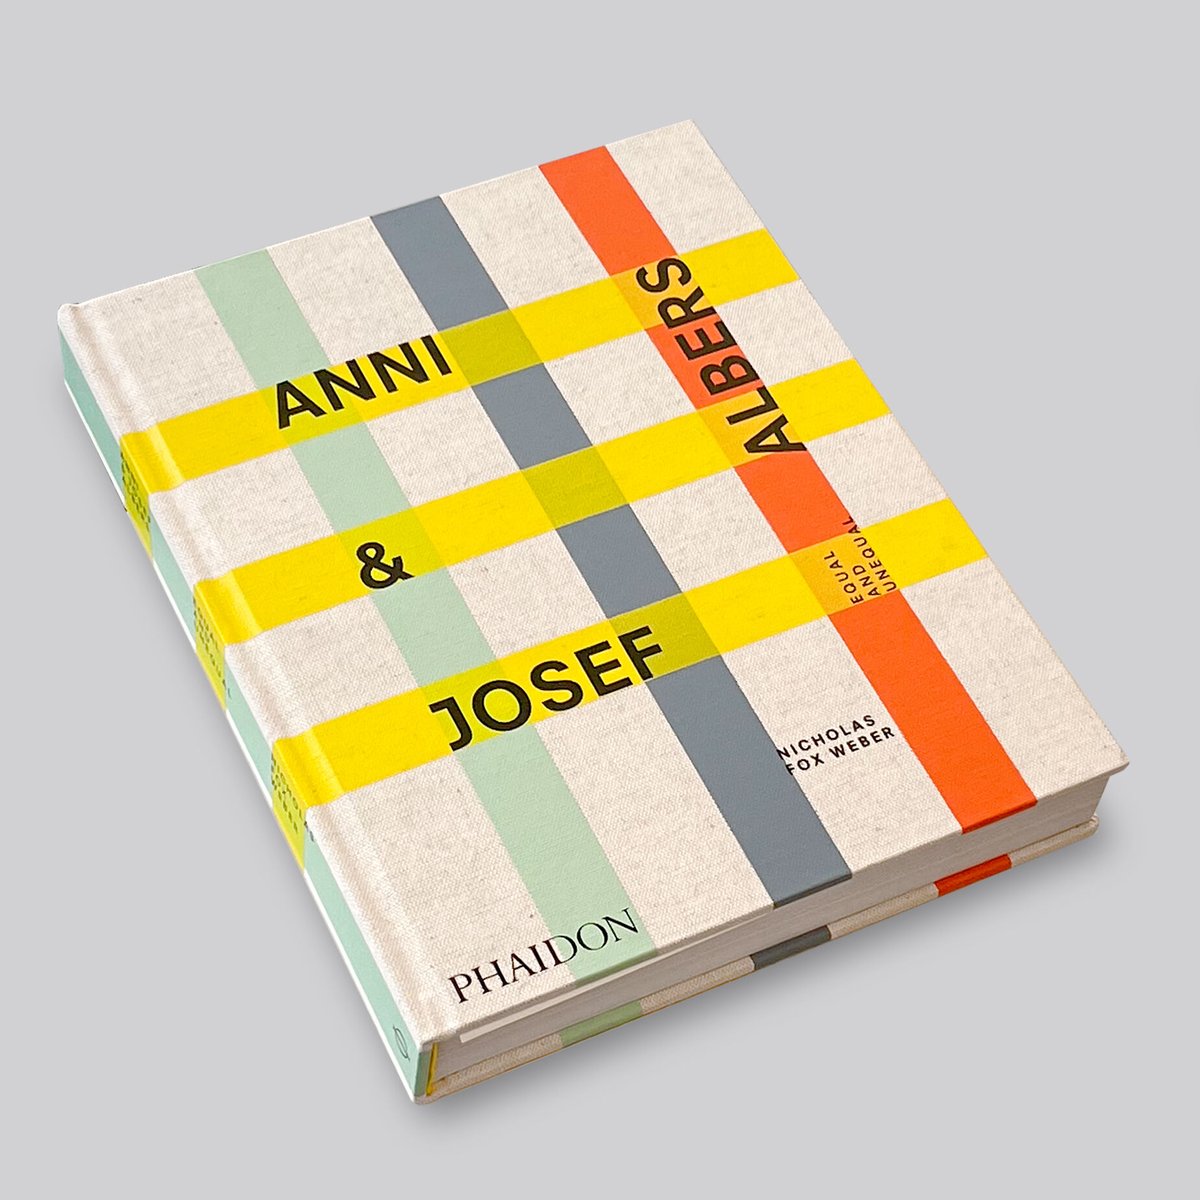 Anni and Josef Albers / Equal and Unequal | POST